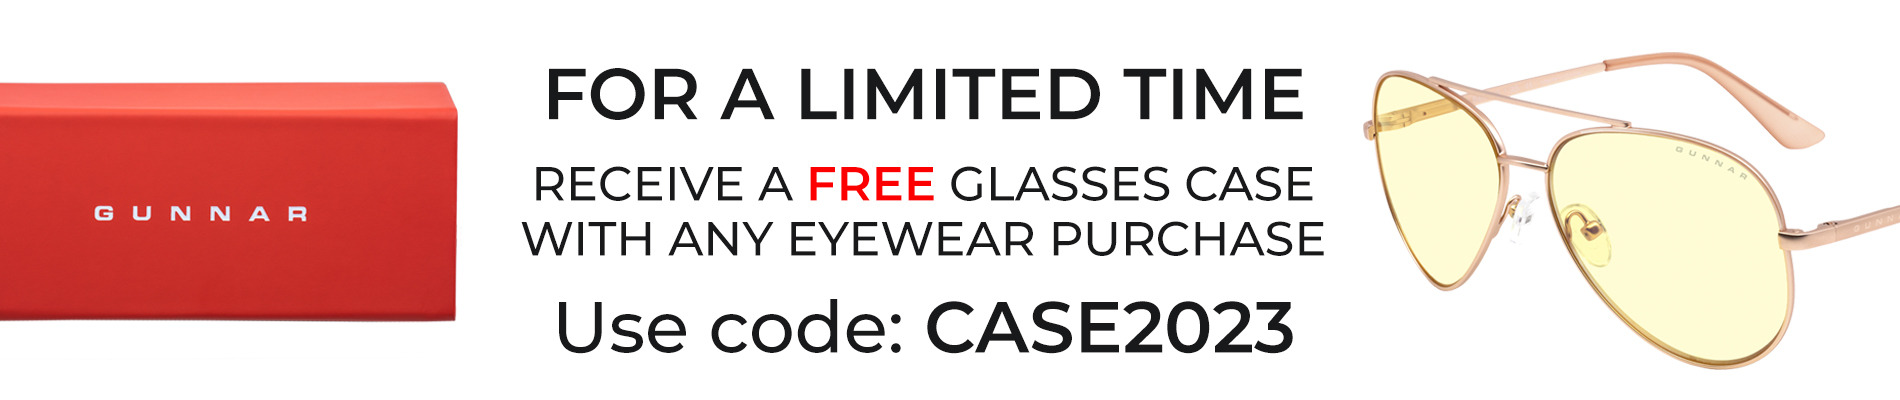 For a limited time receive a FREE glasses case with any eyewear purchase. Use code: CASE2023